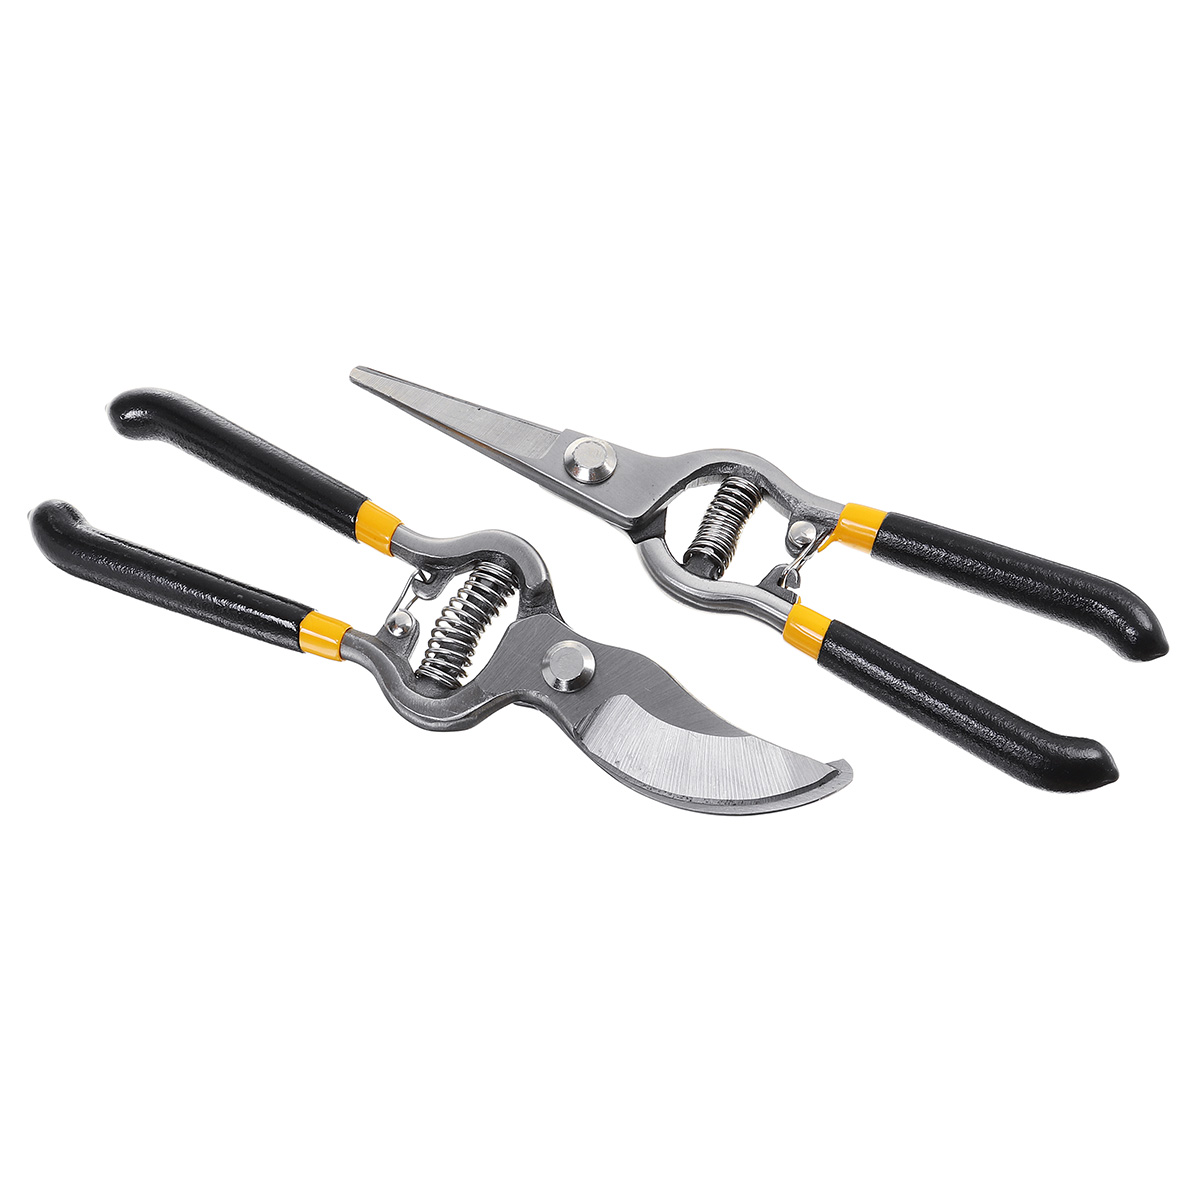 Find 8 Gardening Garden Grass Edge Edging Lawn Pruner Pruning Hand Shears Scissors for Sale on Gipsybee.com with cryptocurrencies